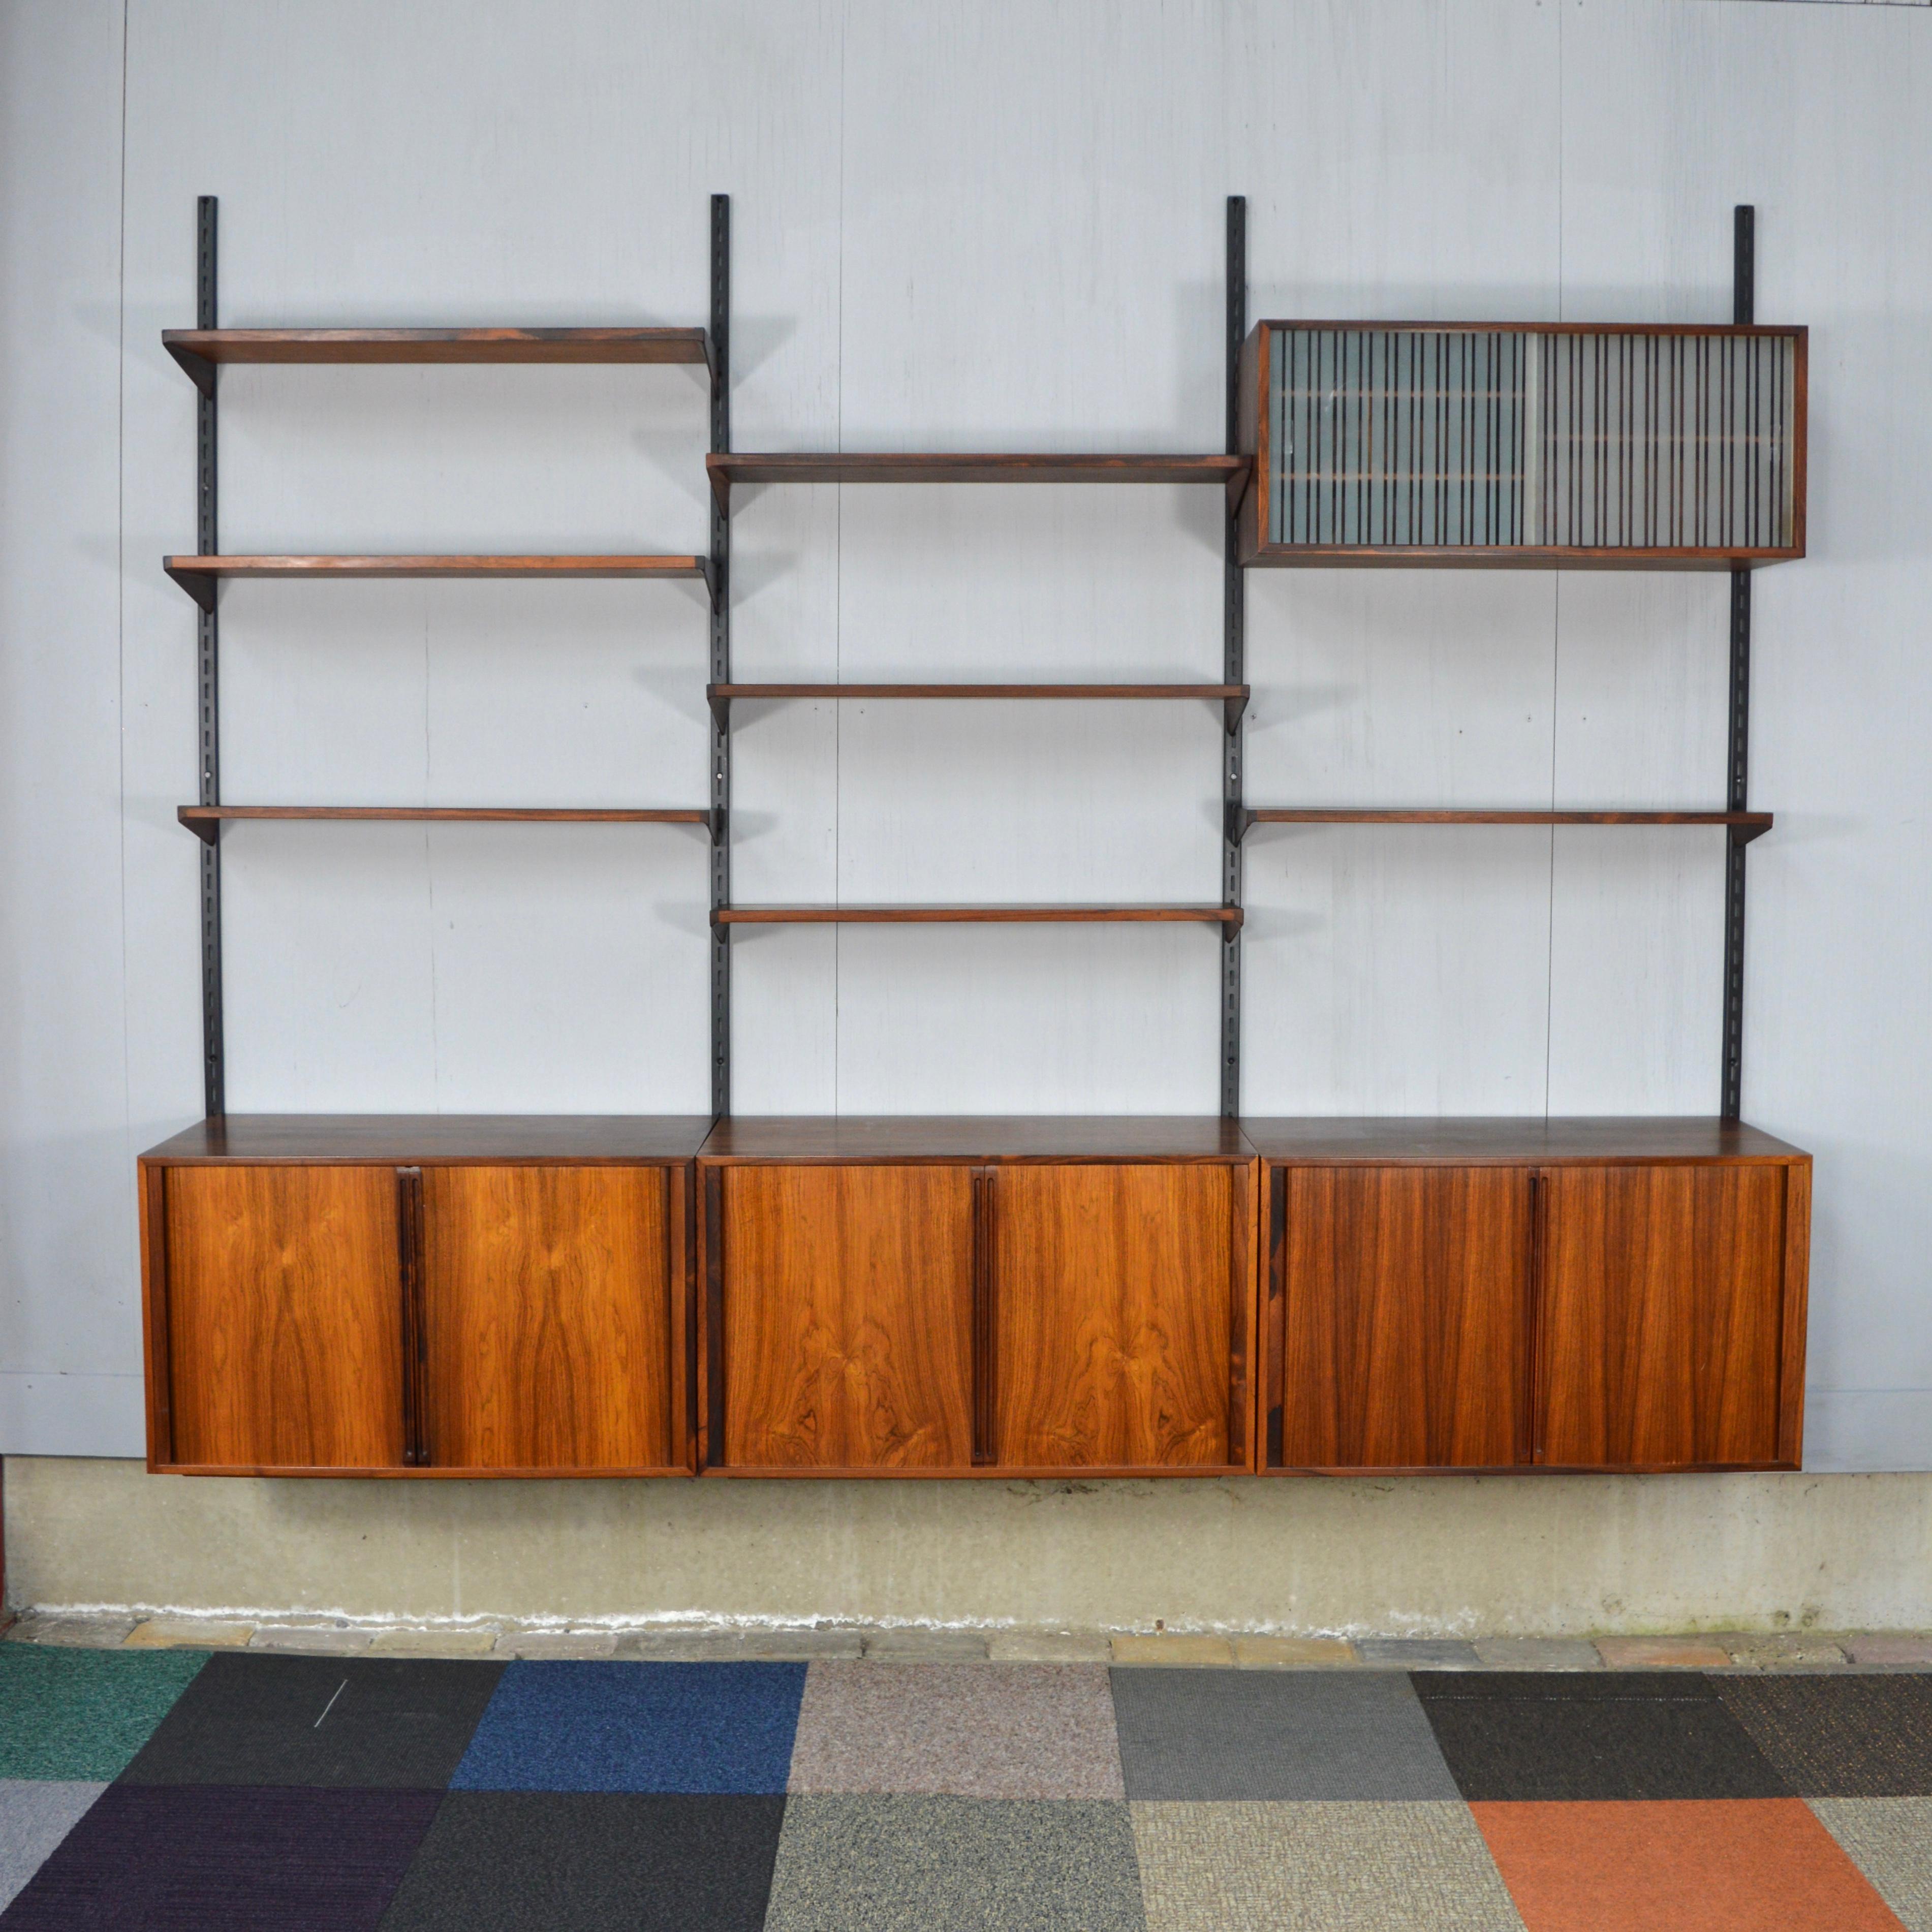 Gorgeous Brazilian rosewood wall unit by Kai Kristiansen for FM Møbler, Denmark.
The cabinets have sliding doors which are made of highly crafted lamellae that slide inside.
Inside two of the cabinets there are two birchwood drawers lined with